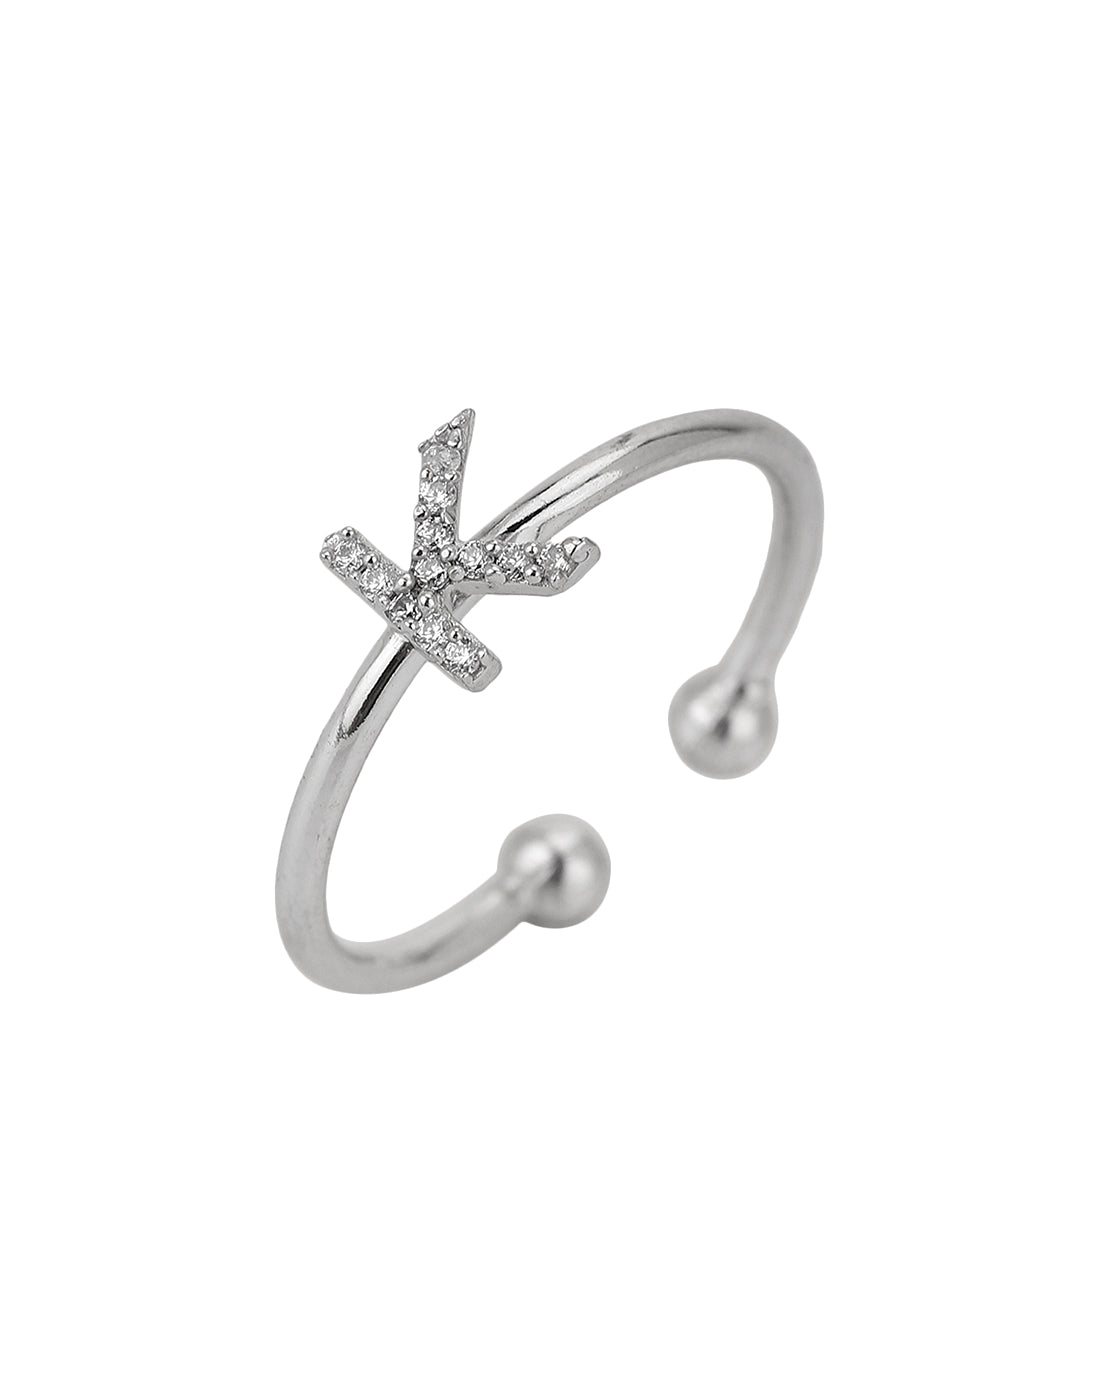 Carlton London Rhodium Plated Silver Toned &quot;K&quot; Shape Cz Studded Adjustable Finger Ring For Women